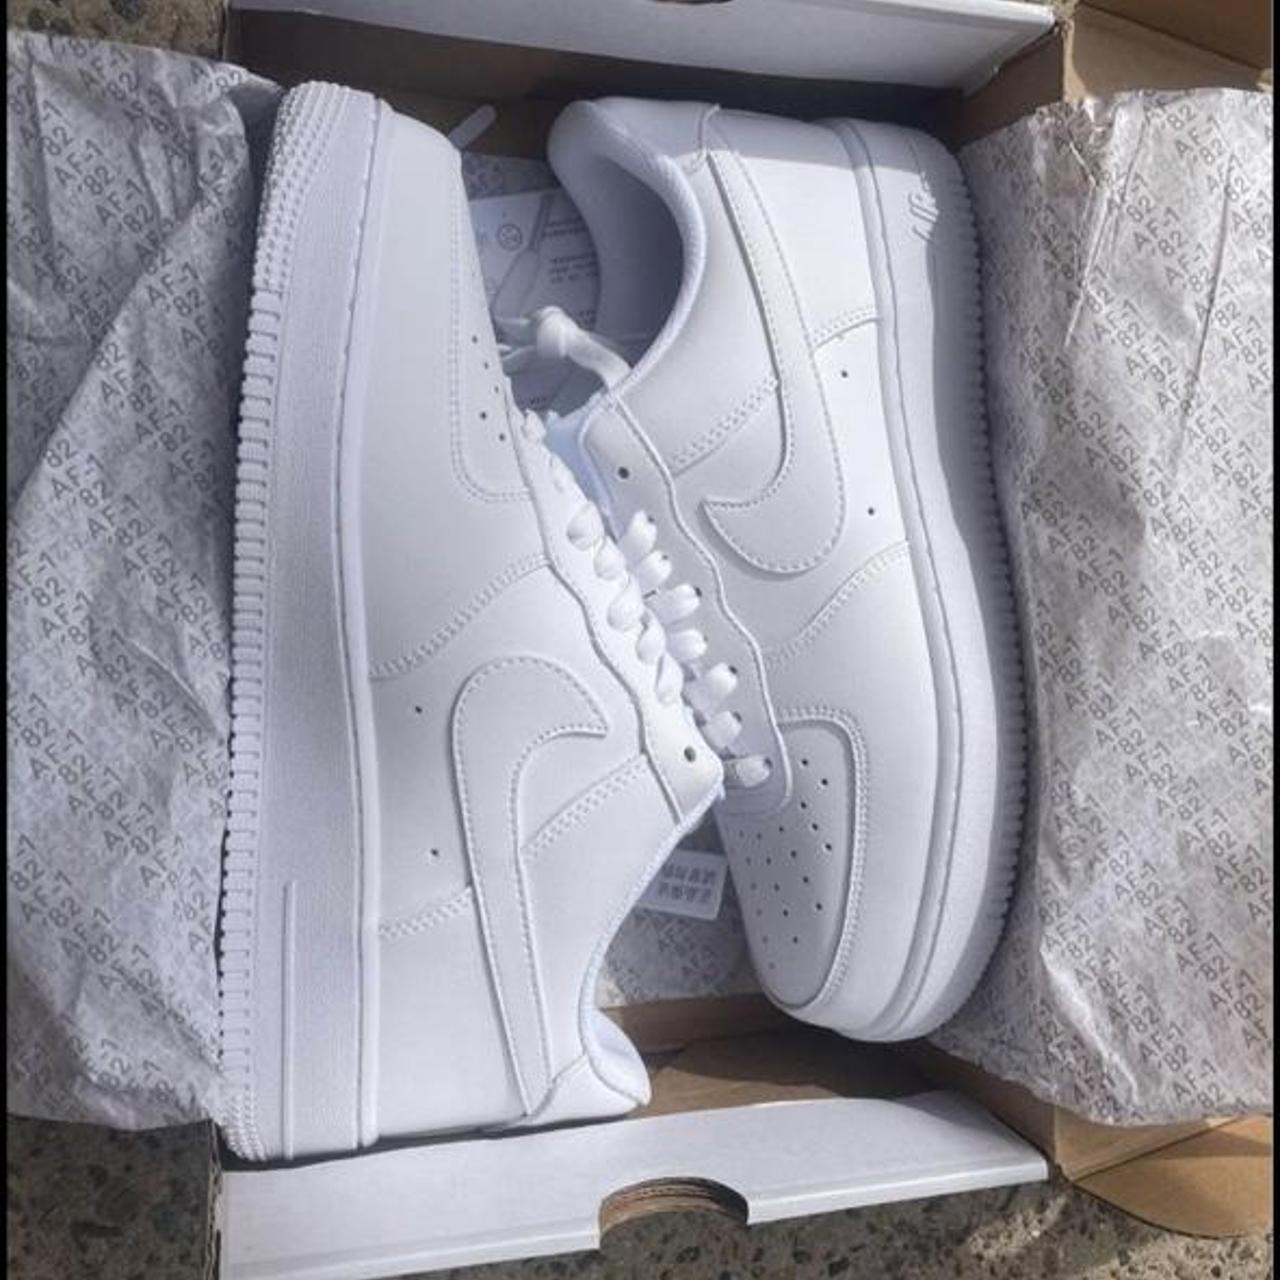 LIKE NEW Nike AF1 Size 10.5 These are slightly... - Depop